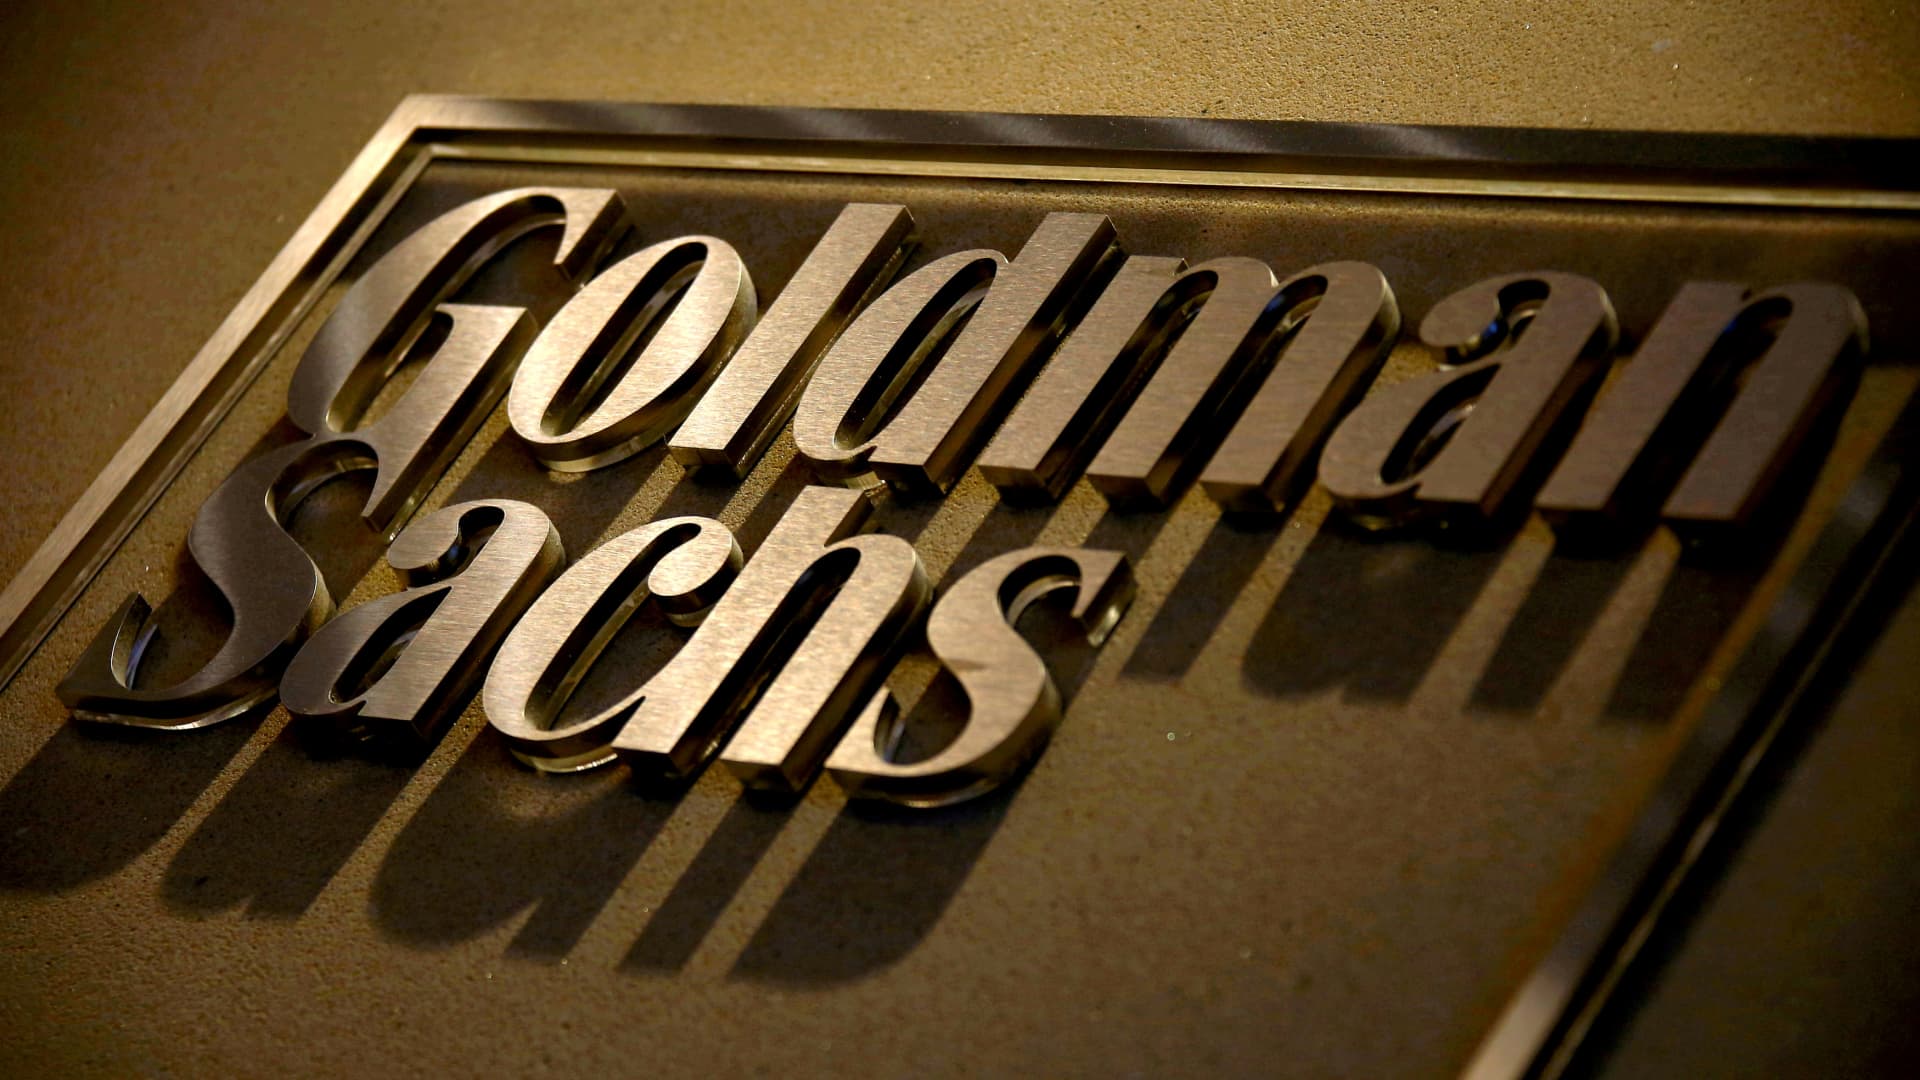 Goldman Sachs to cut asset management investments that weighed on earnings